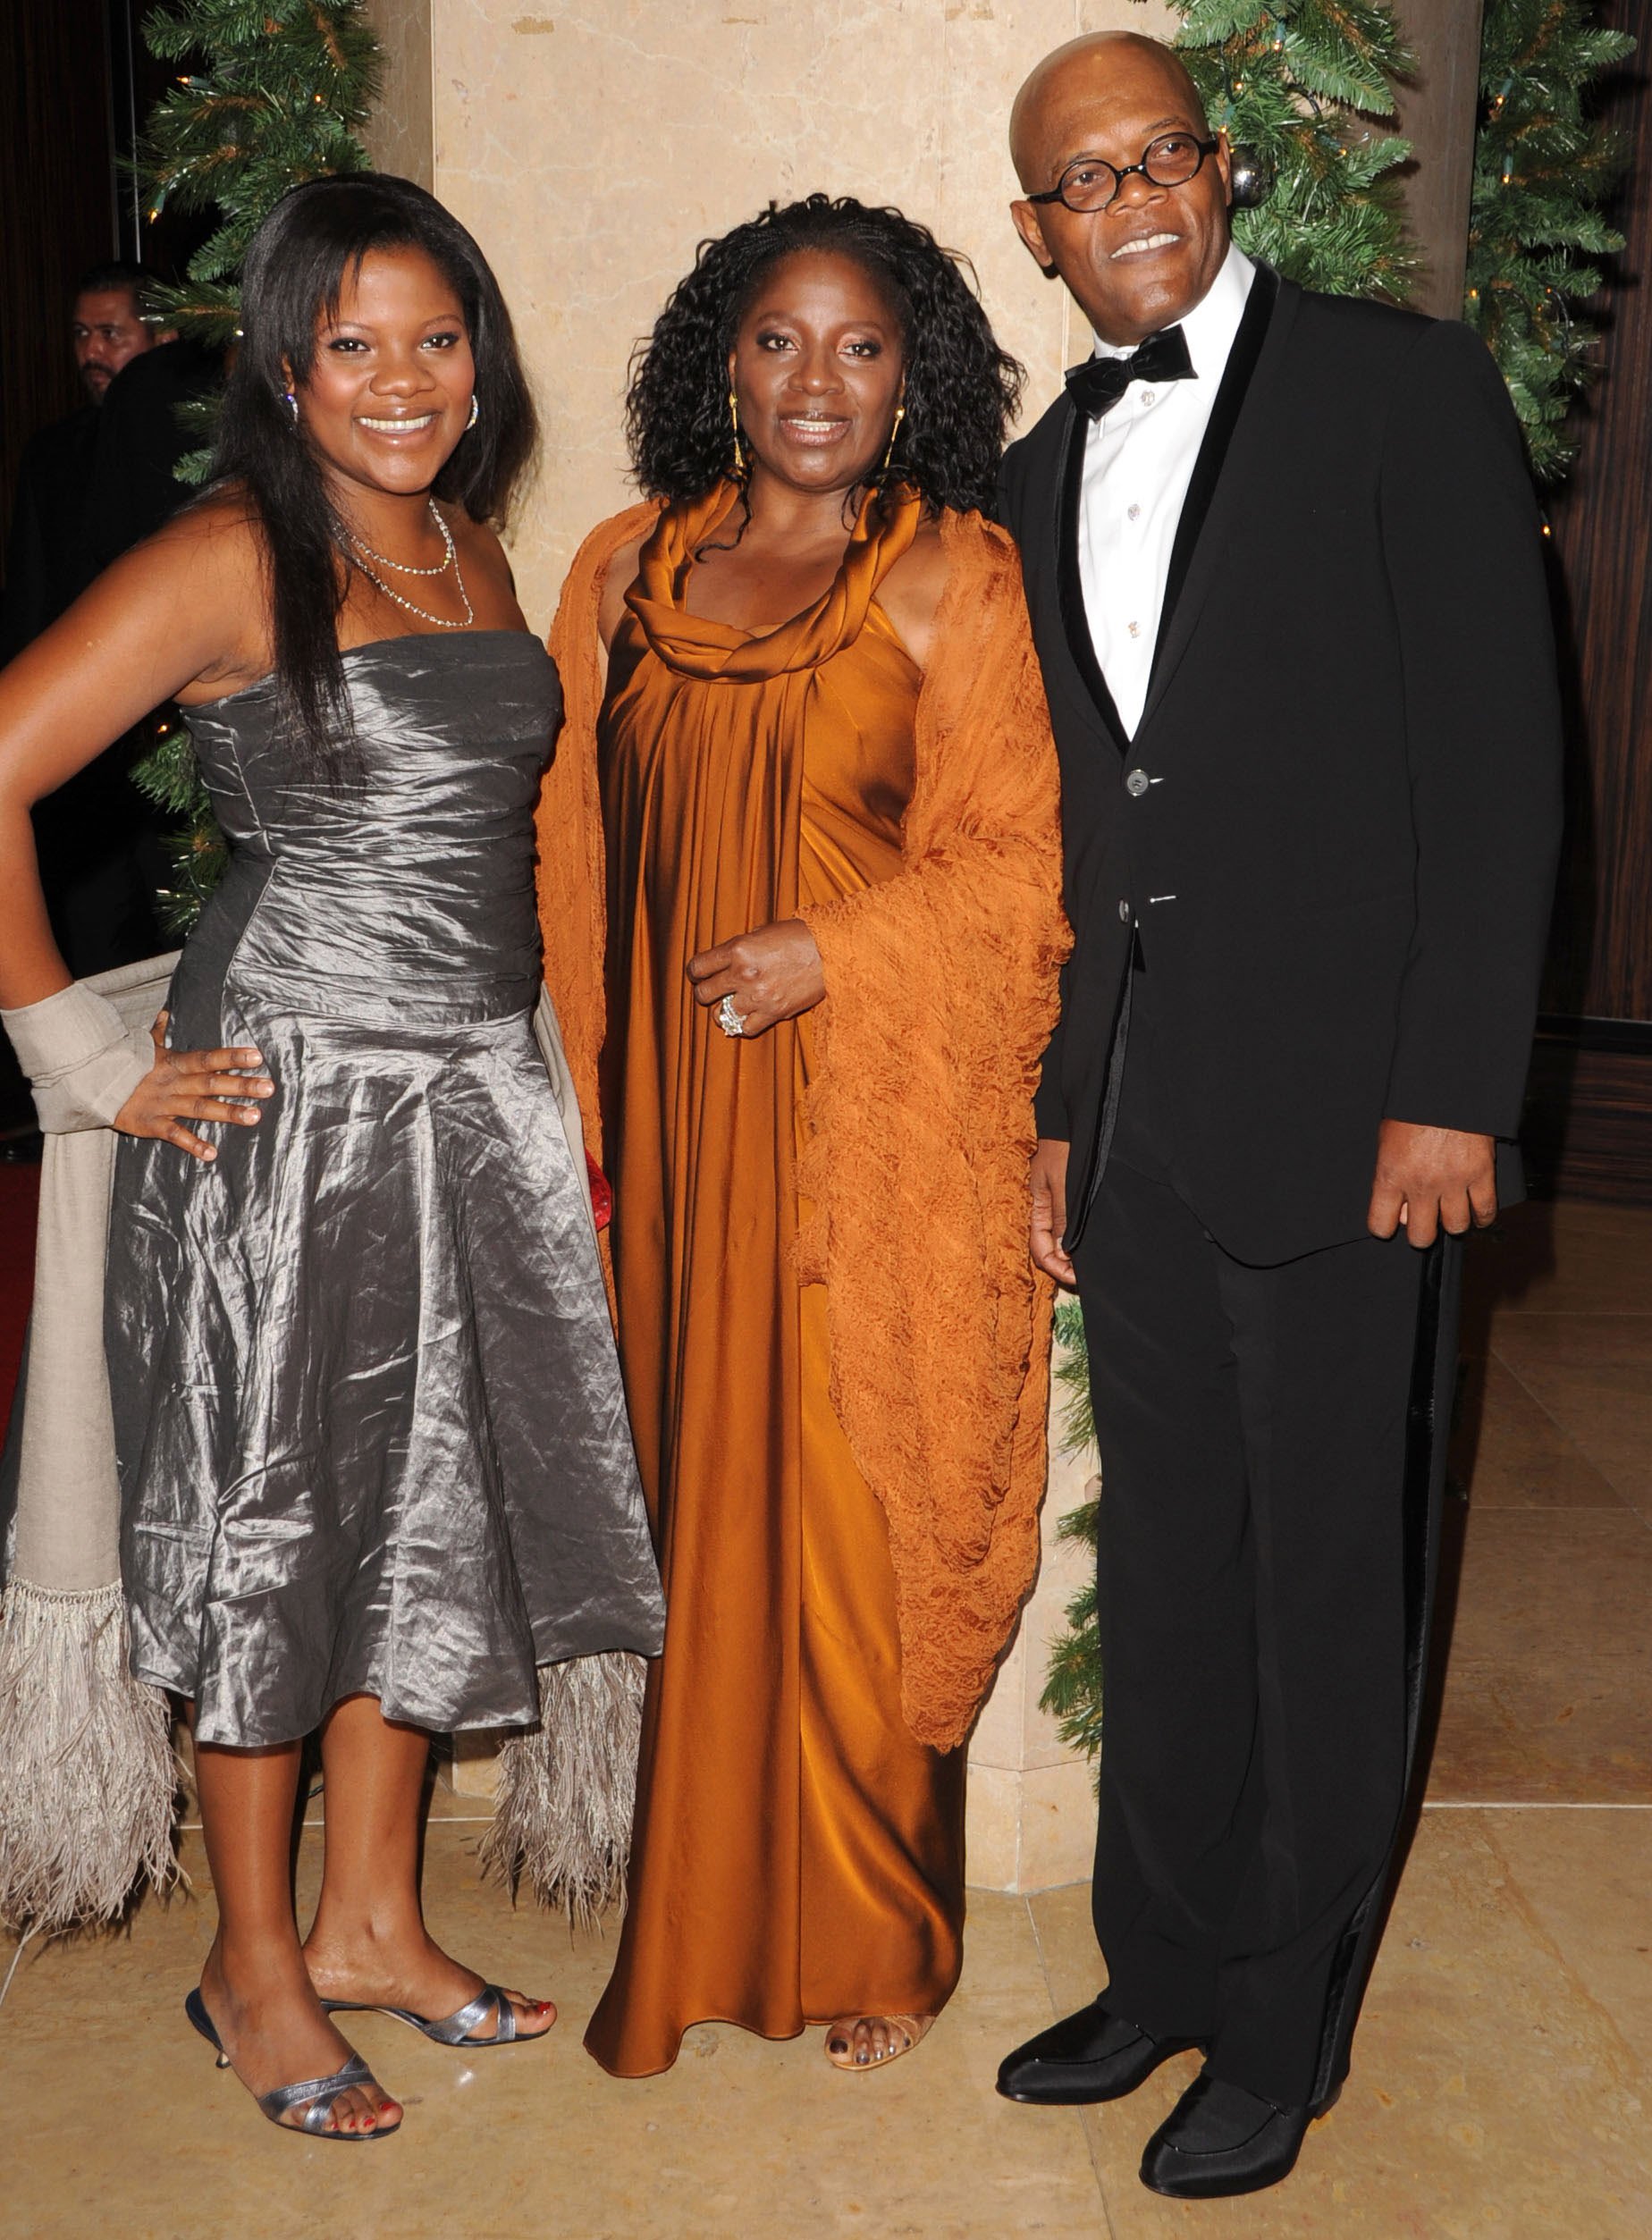 Samuel L. Jackson, LaTanya Richardson, and daughter Zoe Jackson during the 23rd Annual American Cinematheque Awards on December 1, 2008, in Beverly Hills, California. | Source: Getty Images